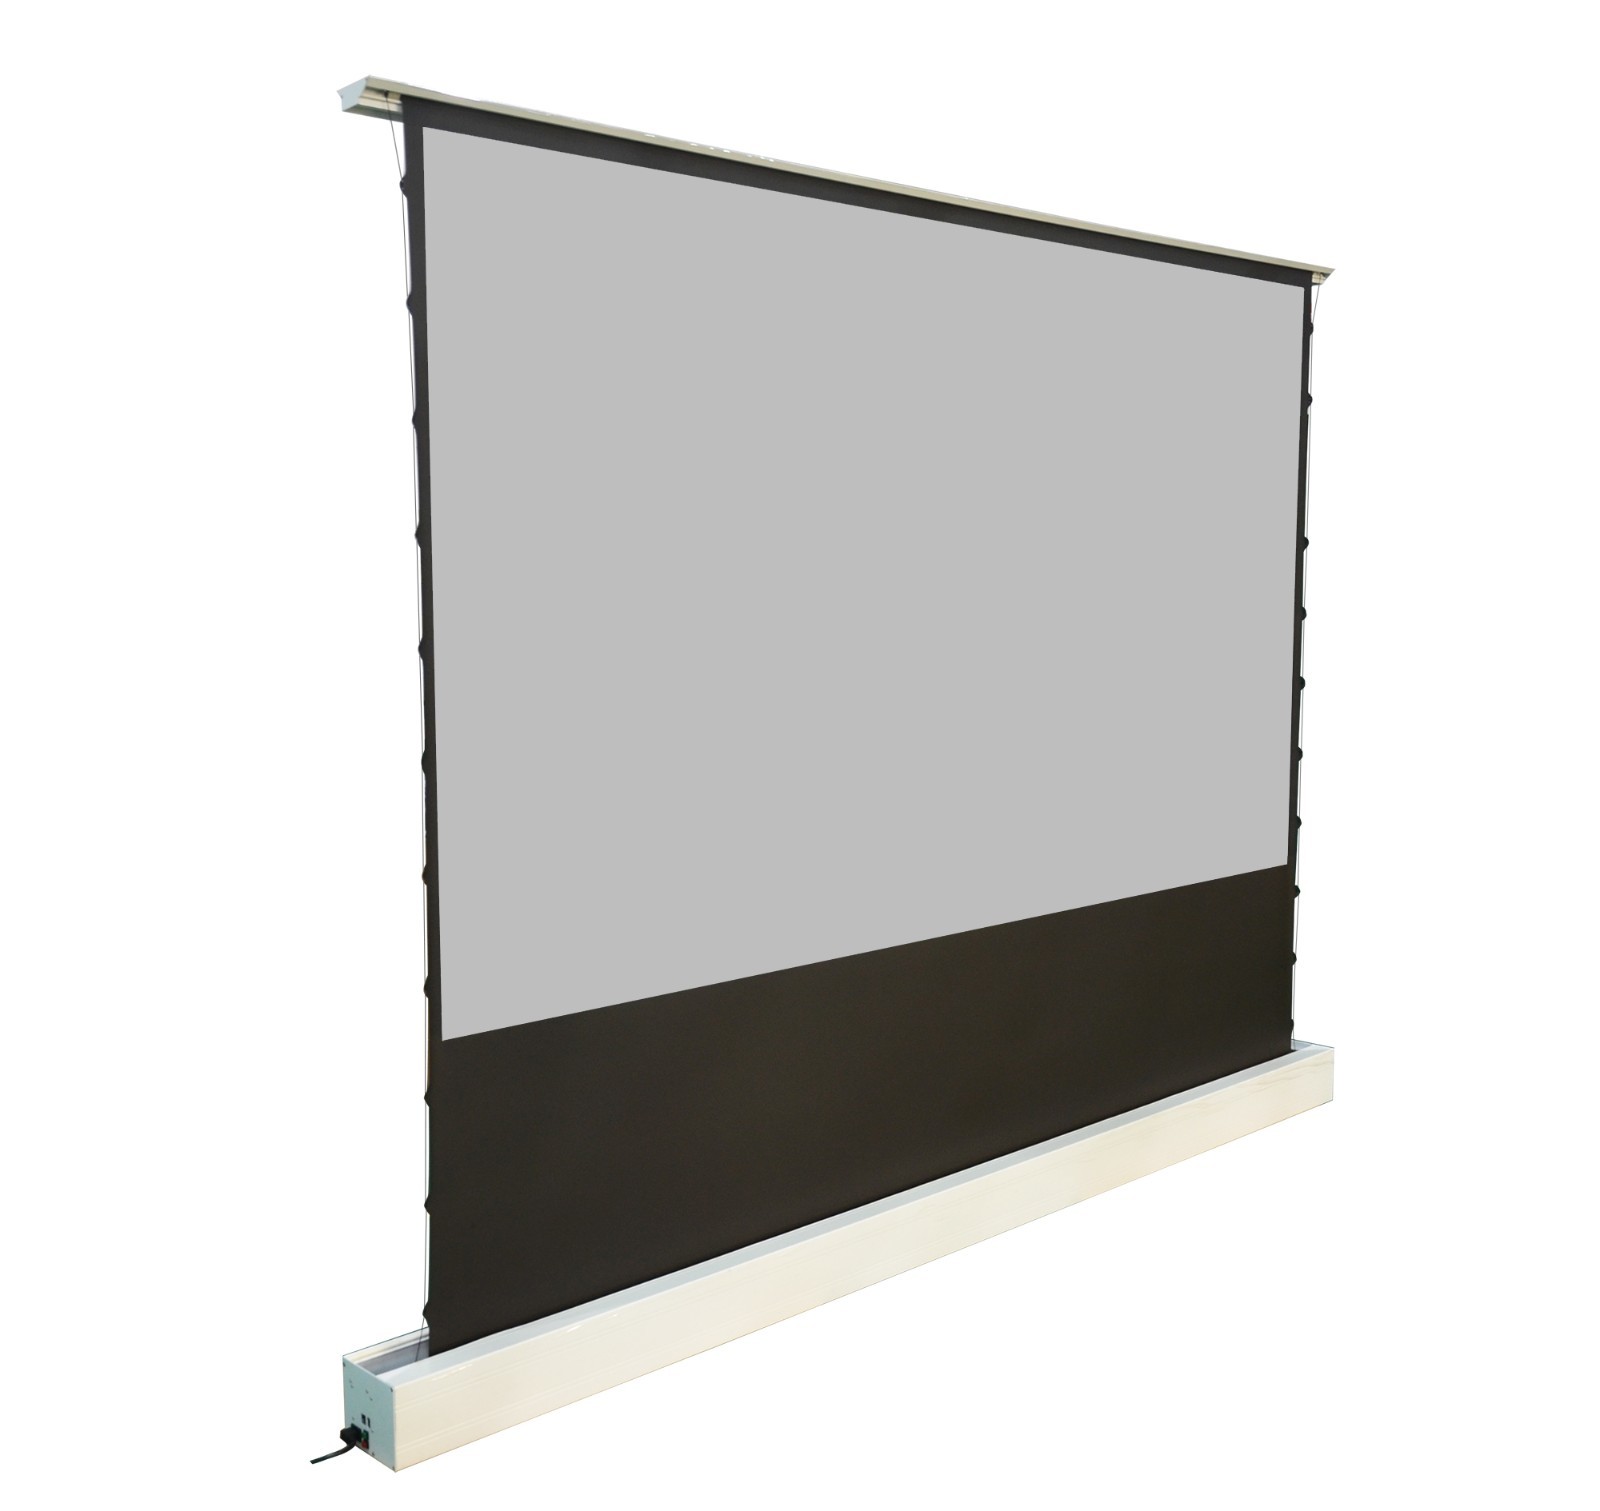 XY Screens manual pull up projector screen with good price for indoors